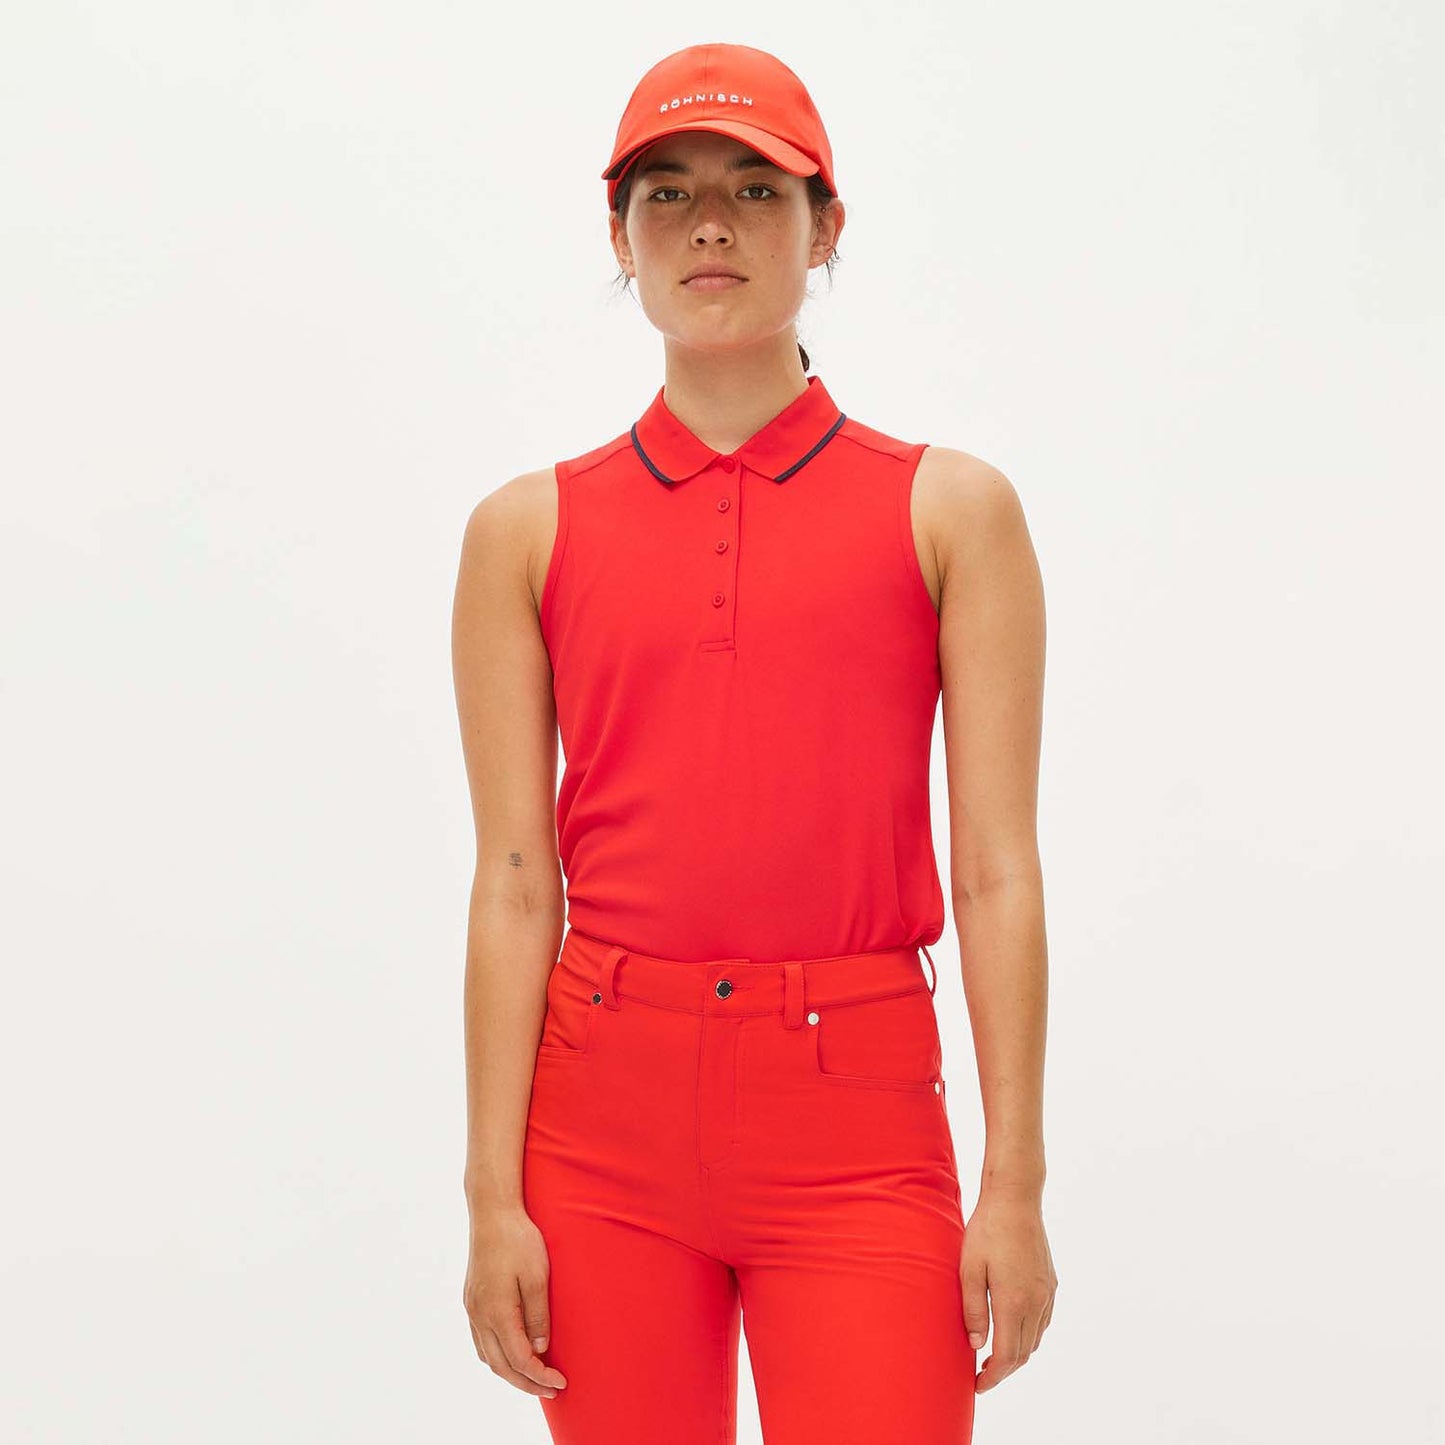 Rohnisch Ladies Sleeveless Polo with Contrast Trim in Flame Scarlet